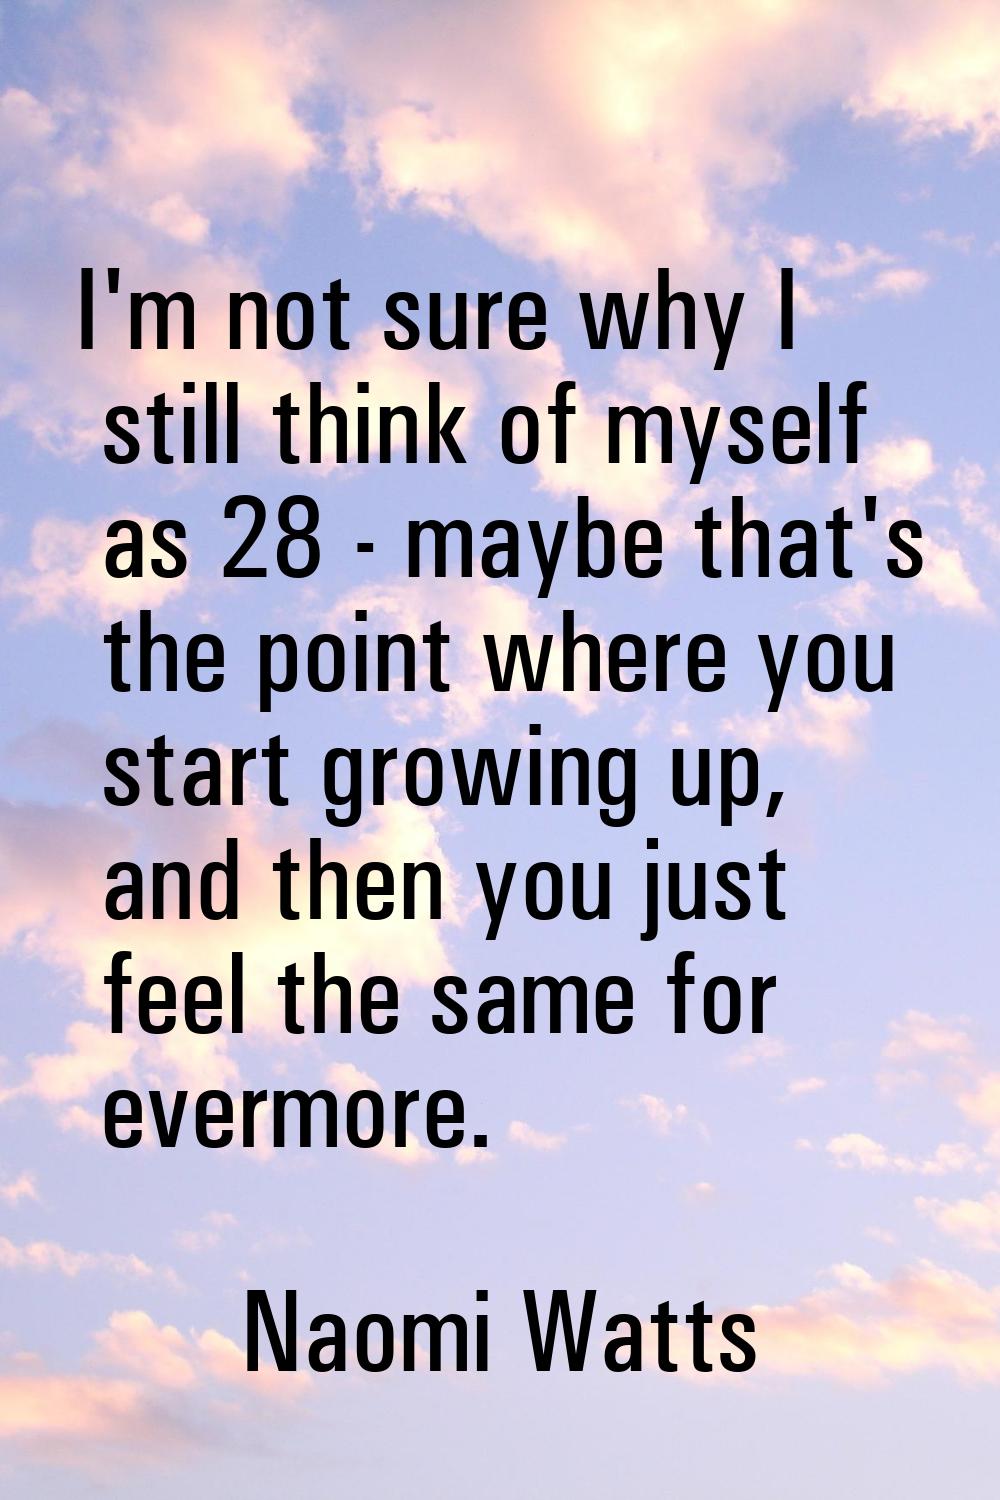 I'm not sure why I still think of myself as 28 - maybe that's the point where you start growing up,